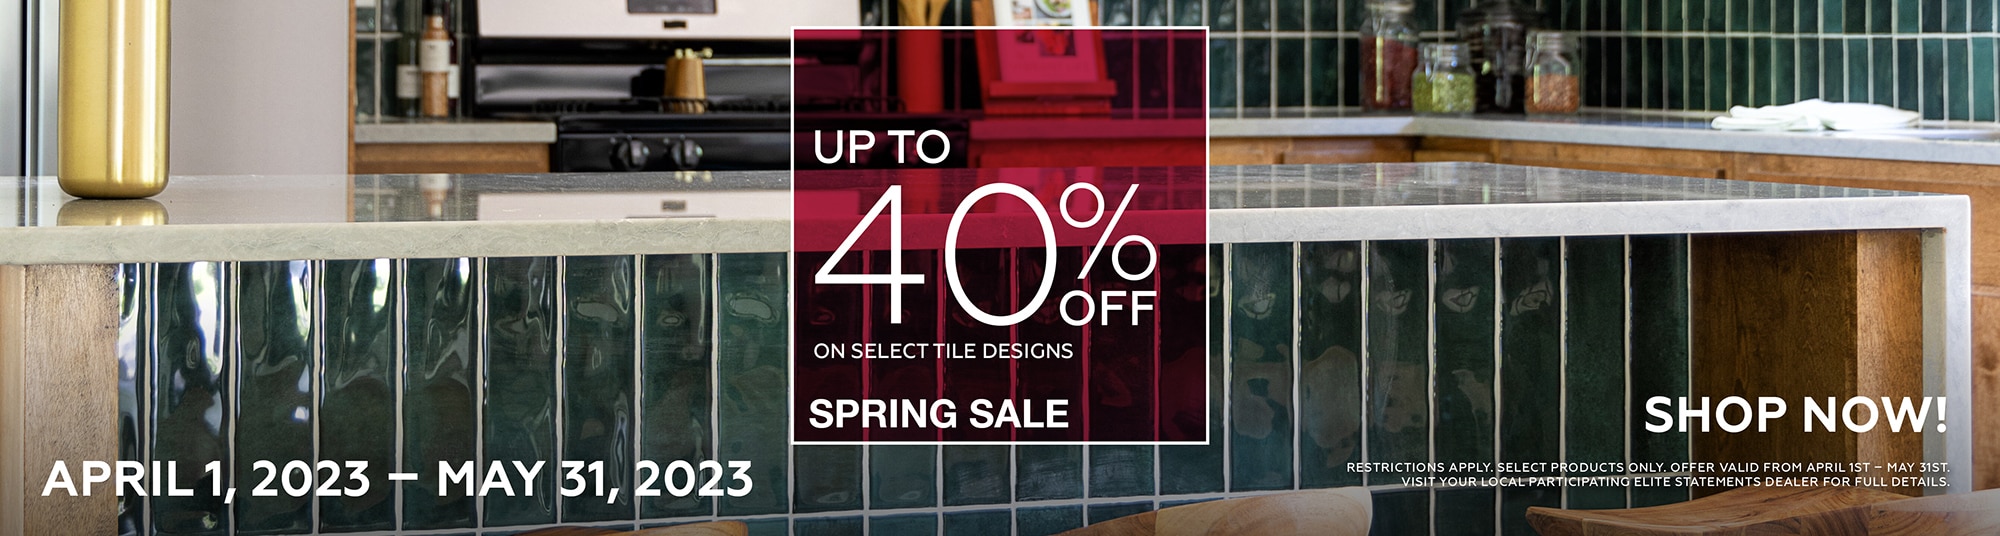 Spring Sale April 1 through May 31 Up to 40 percent off on select tile designs